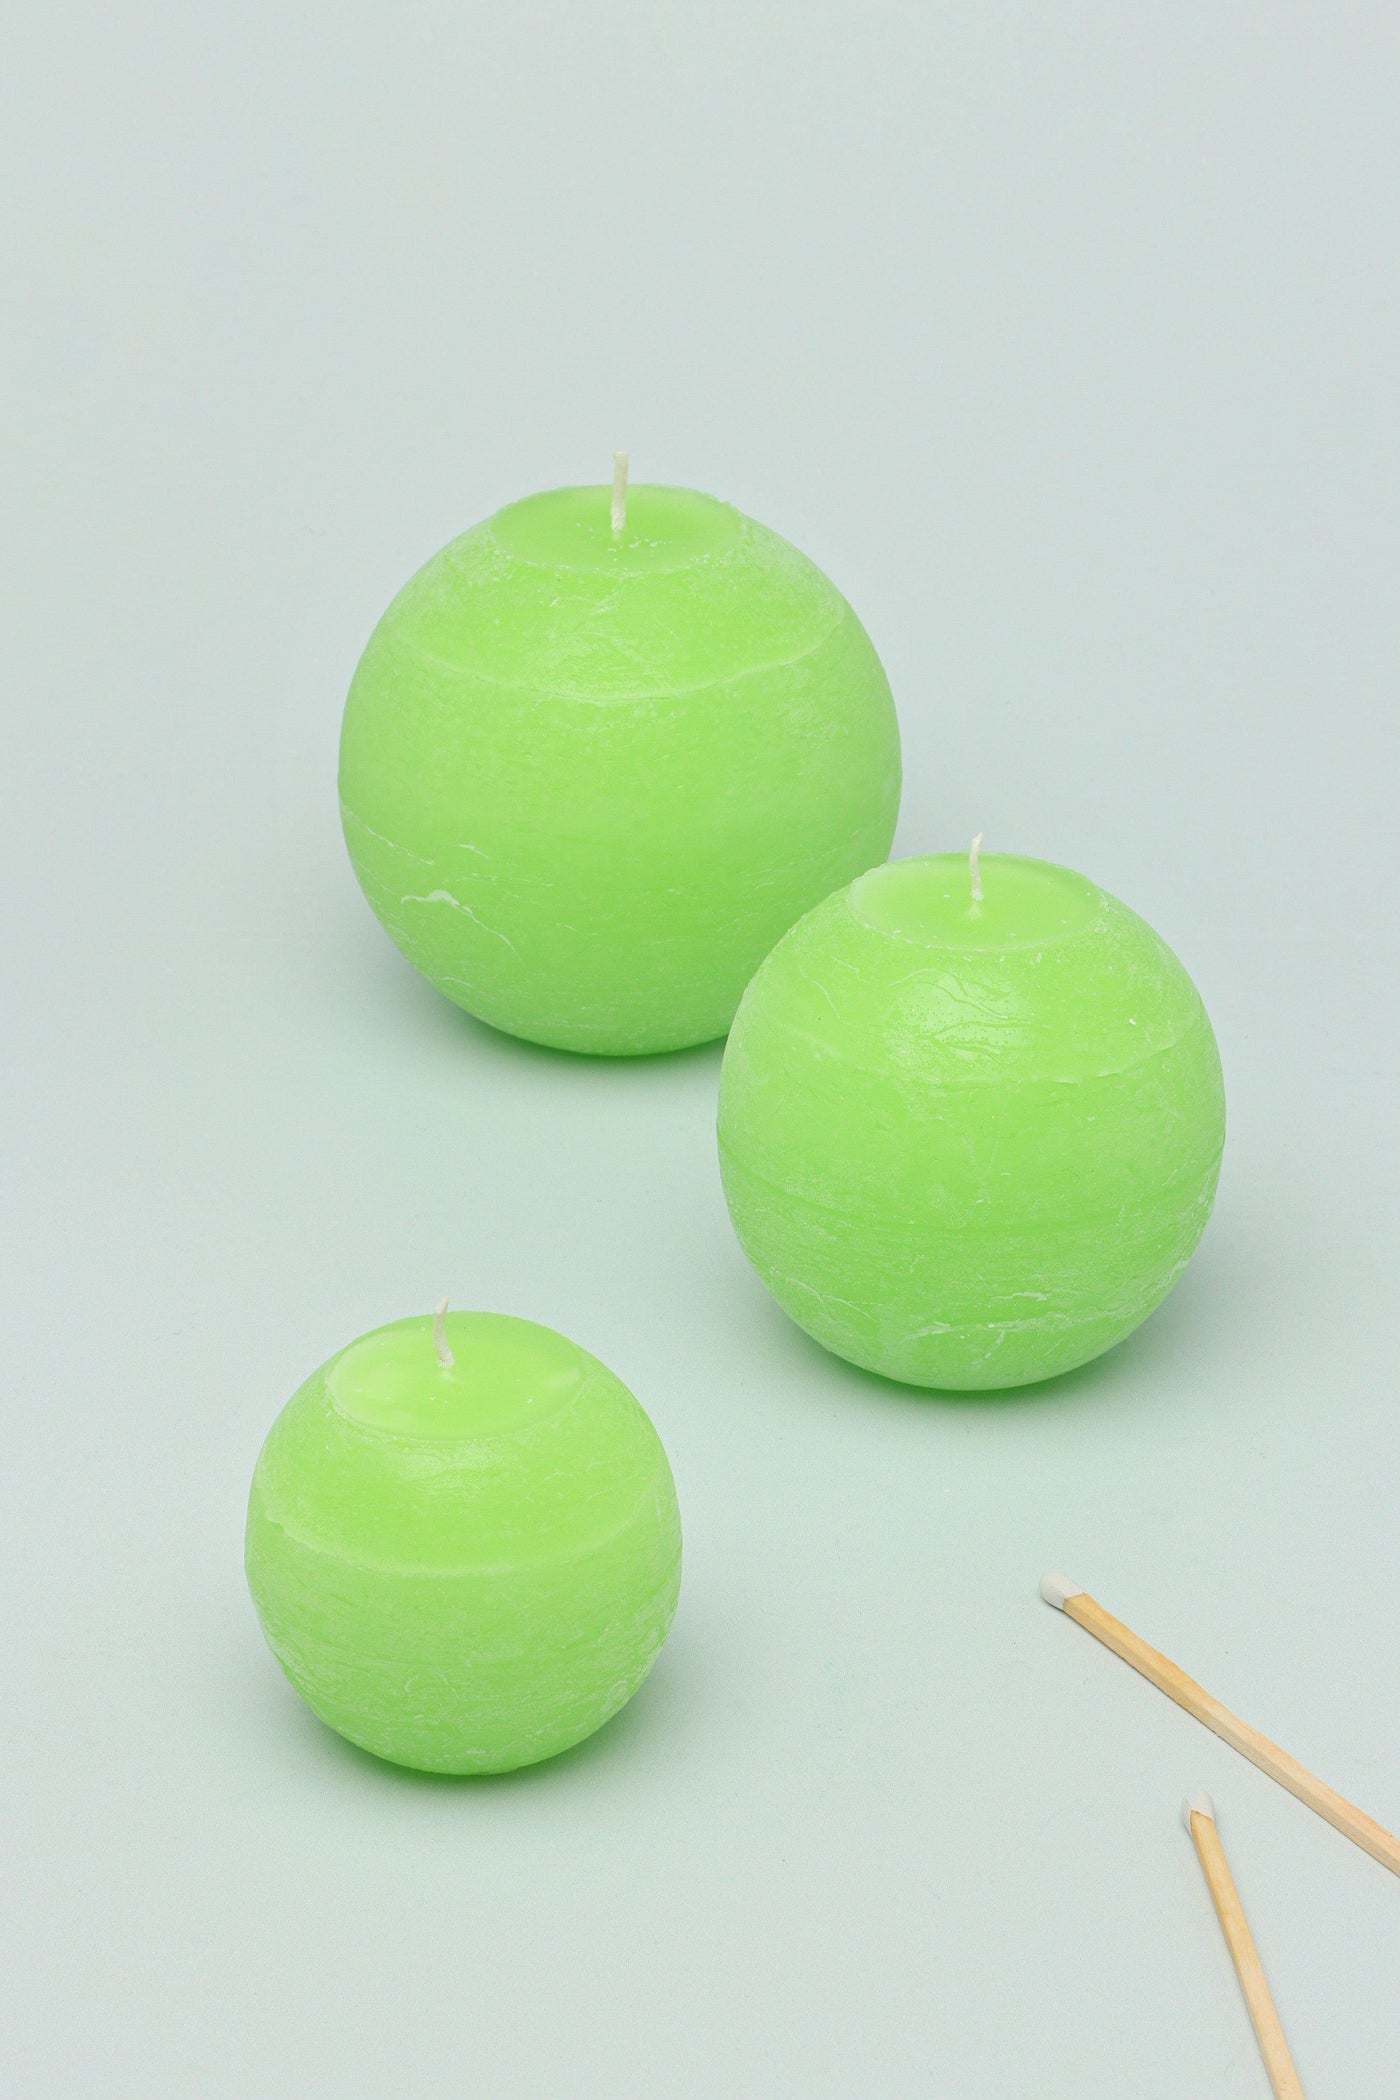 G Decor Candles & Candle Holders Set of Three Georgia Lime Green Ombre Sphere Ball Candles